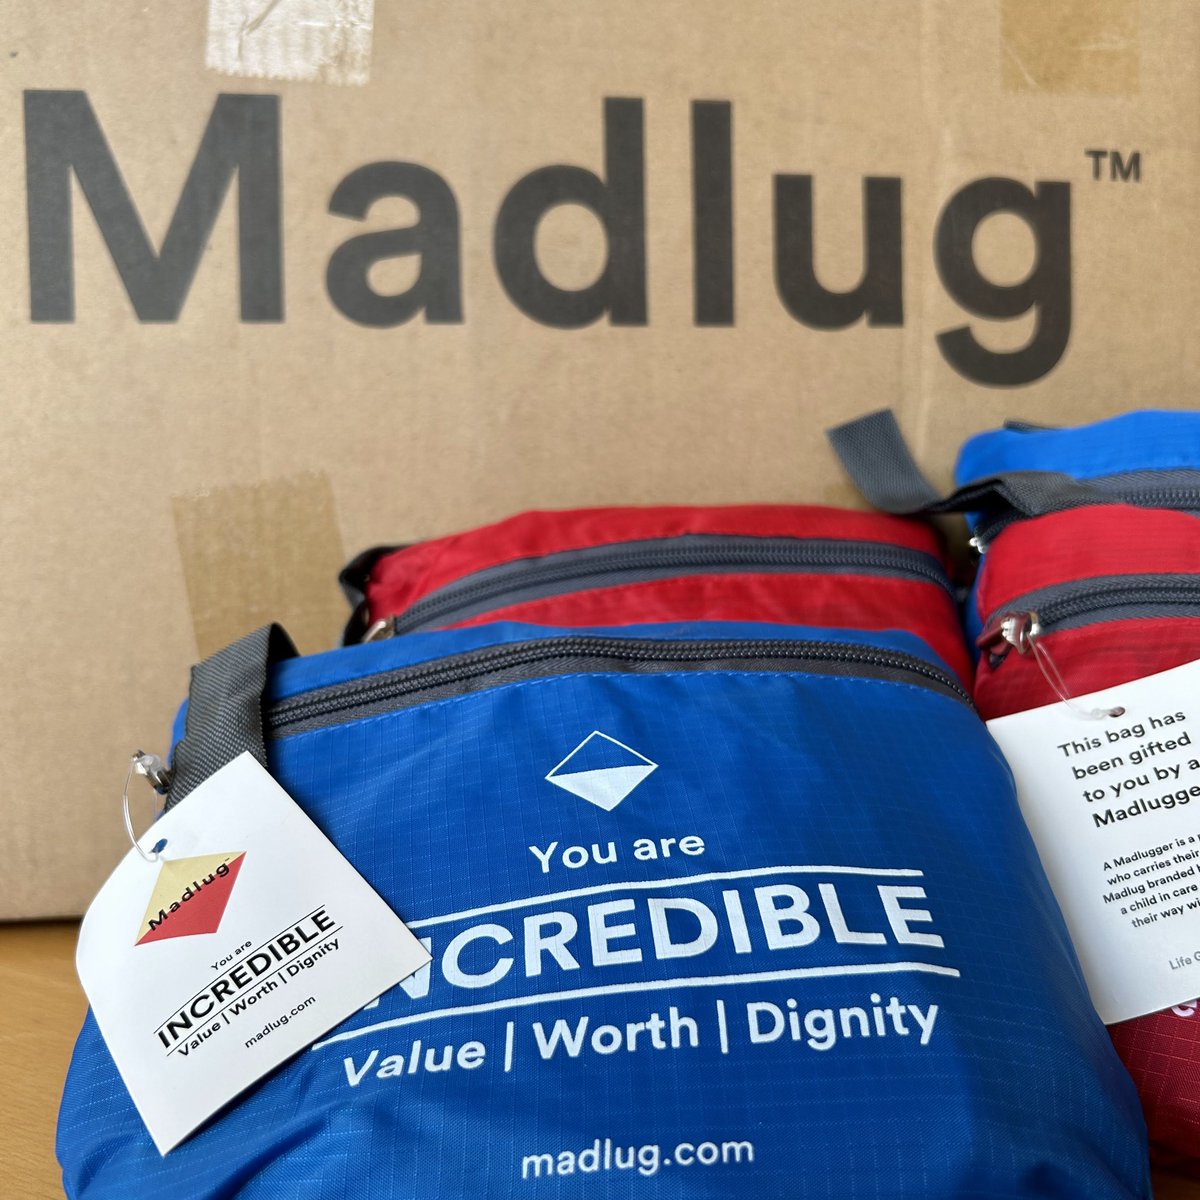 Thankyou @wearemadlug for donating 450 pack-away bags for our Care Leavers!
Every bag their customers buy, a pack-away travel bag goes to a child in care ensuring they have worth & the right to move in dignity.
YLF are proud to be able to partner with Madlug & their amazing work!